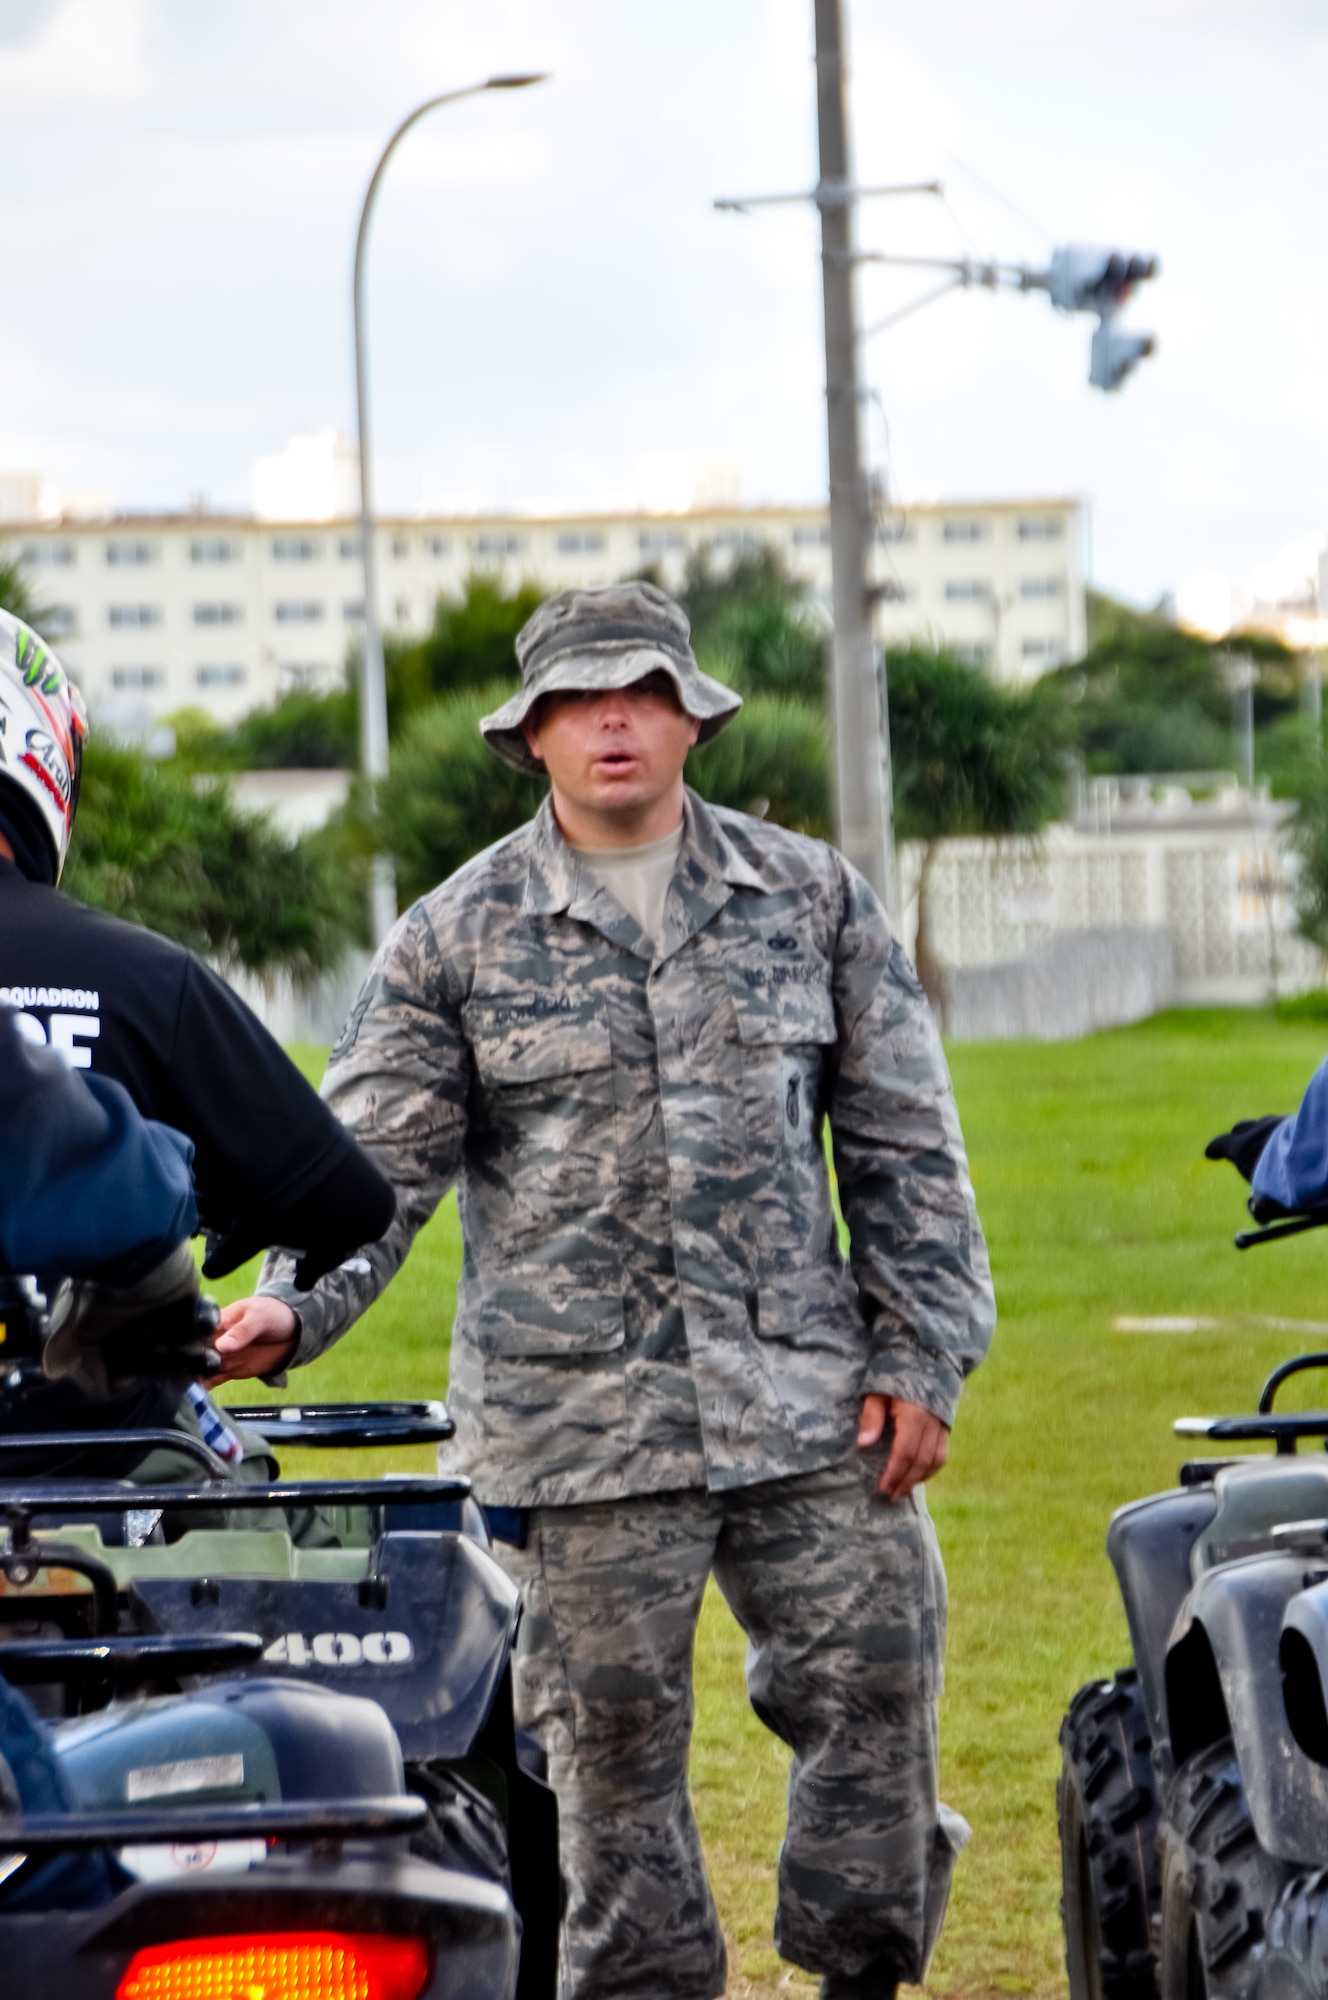 Tech. Sgt. Alexander Goreski, 944th Security Forces Squadron action officer, provides All Terrain Vehicle training to 18 SFS members June 30, 2016 during his annual tour dubbed “Operation Patriot Habu” at Kadena Air Base, Okinawa.   Because of their level of experience, Citizen Airmen from the 944th have integrated seamlessly into all aspects of the 18 SFS.  (U.S. Air Force photo by Tech. Sgt. Barbara Plante)